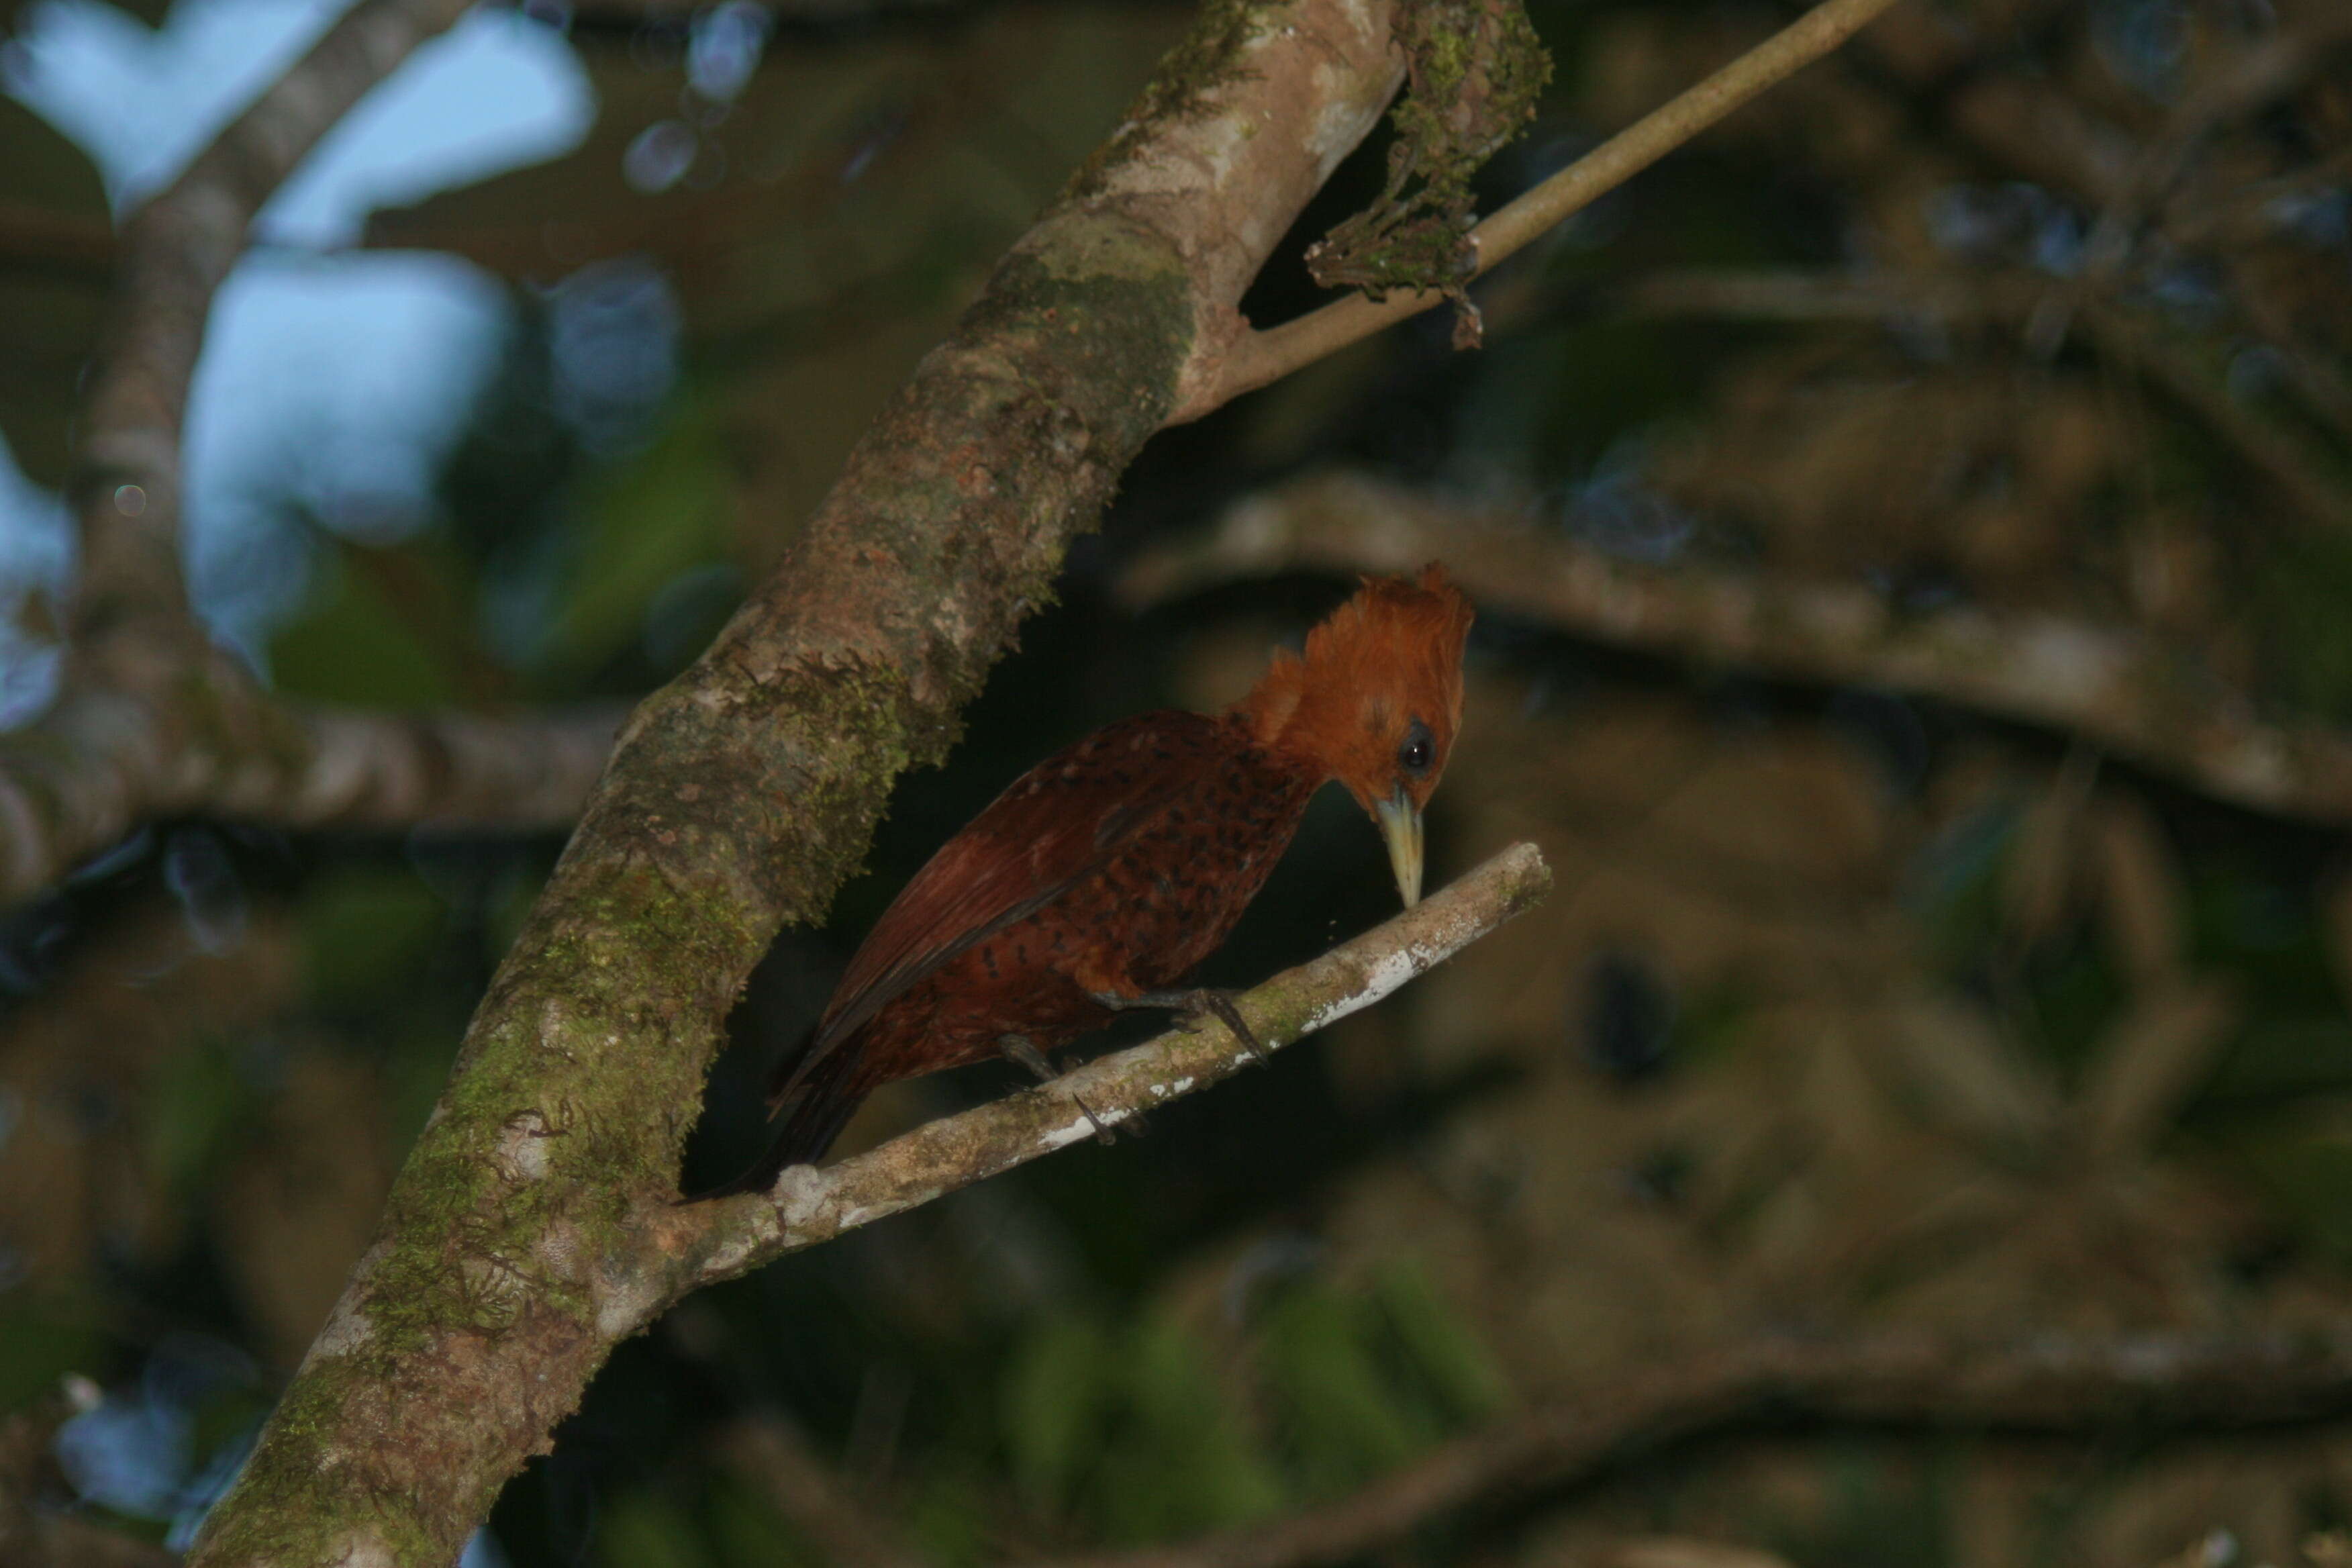 Image of Chestnut-colored Woodpecker